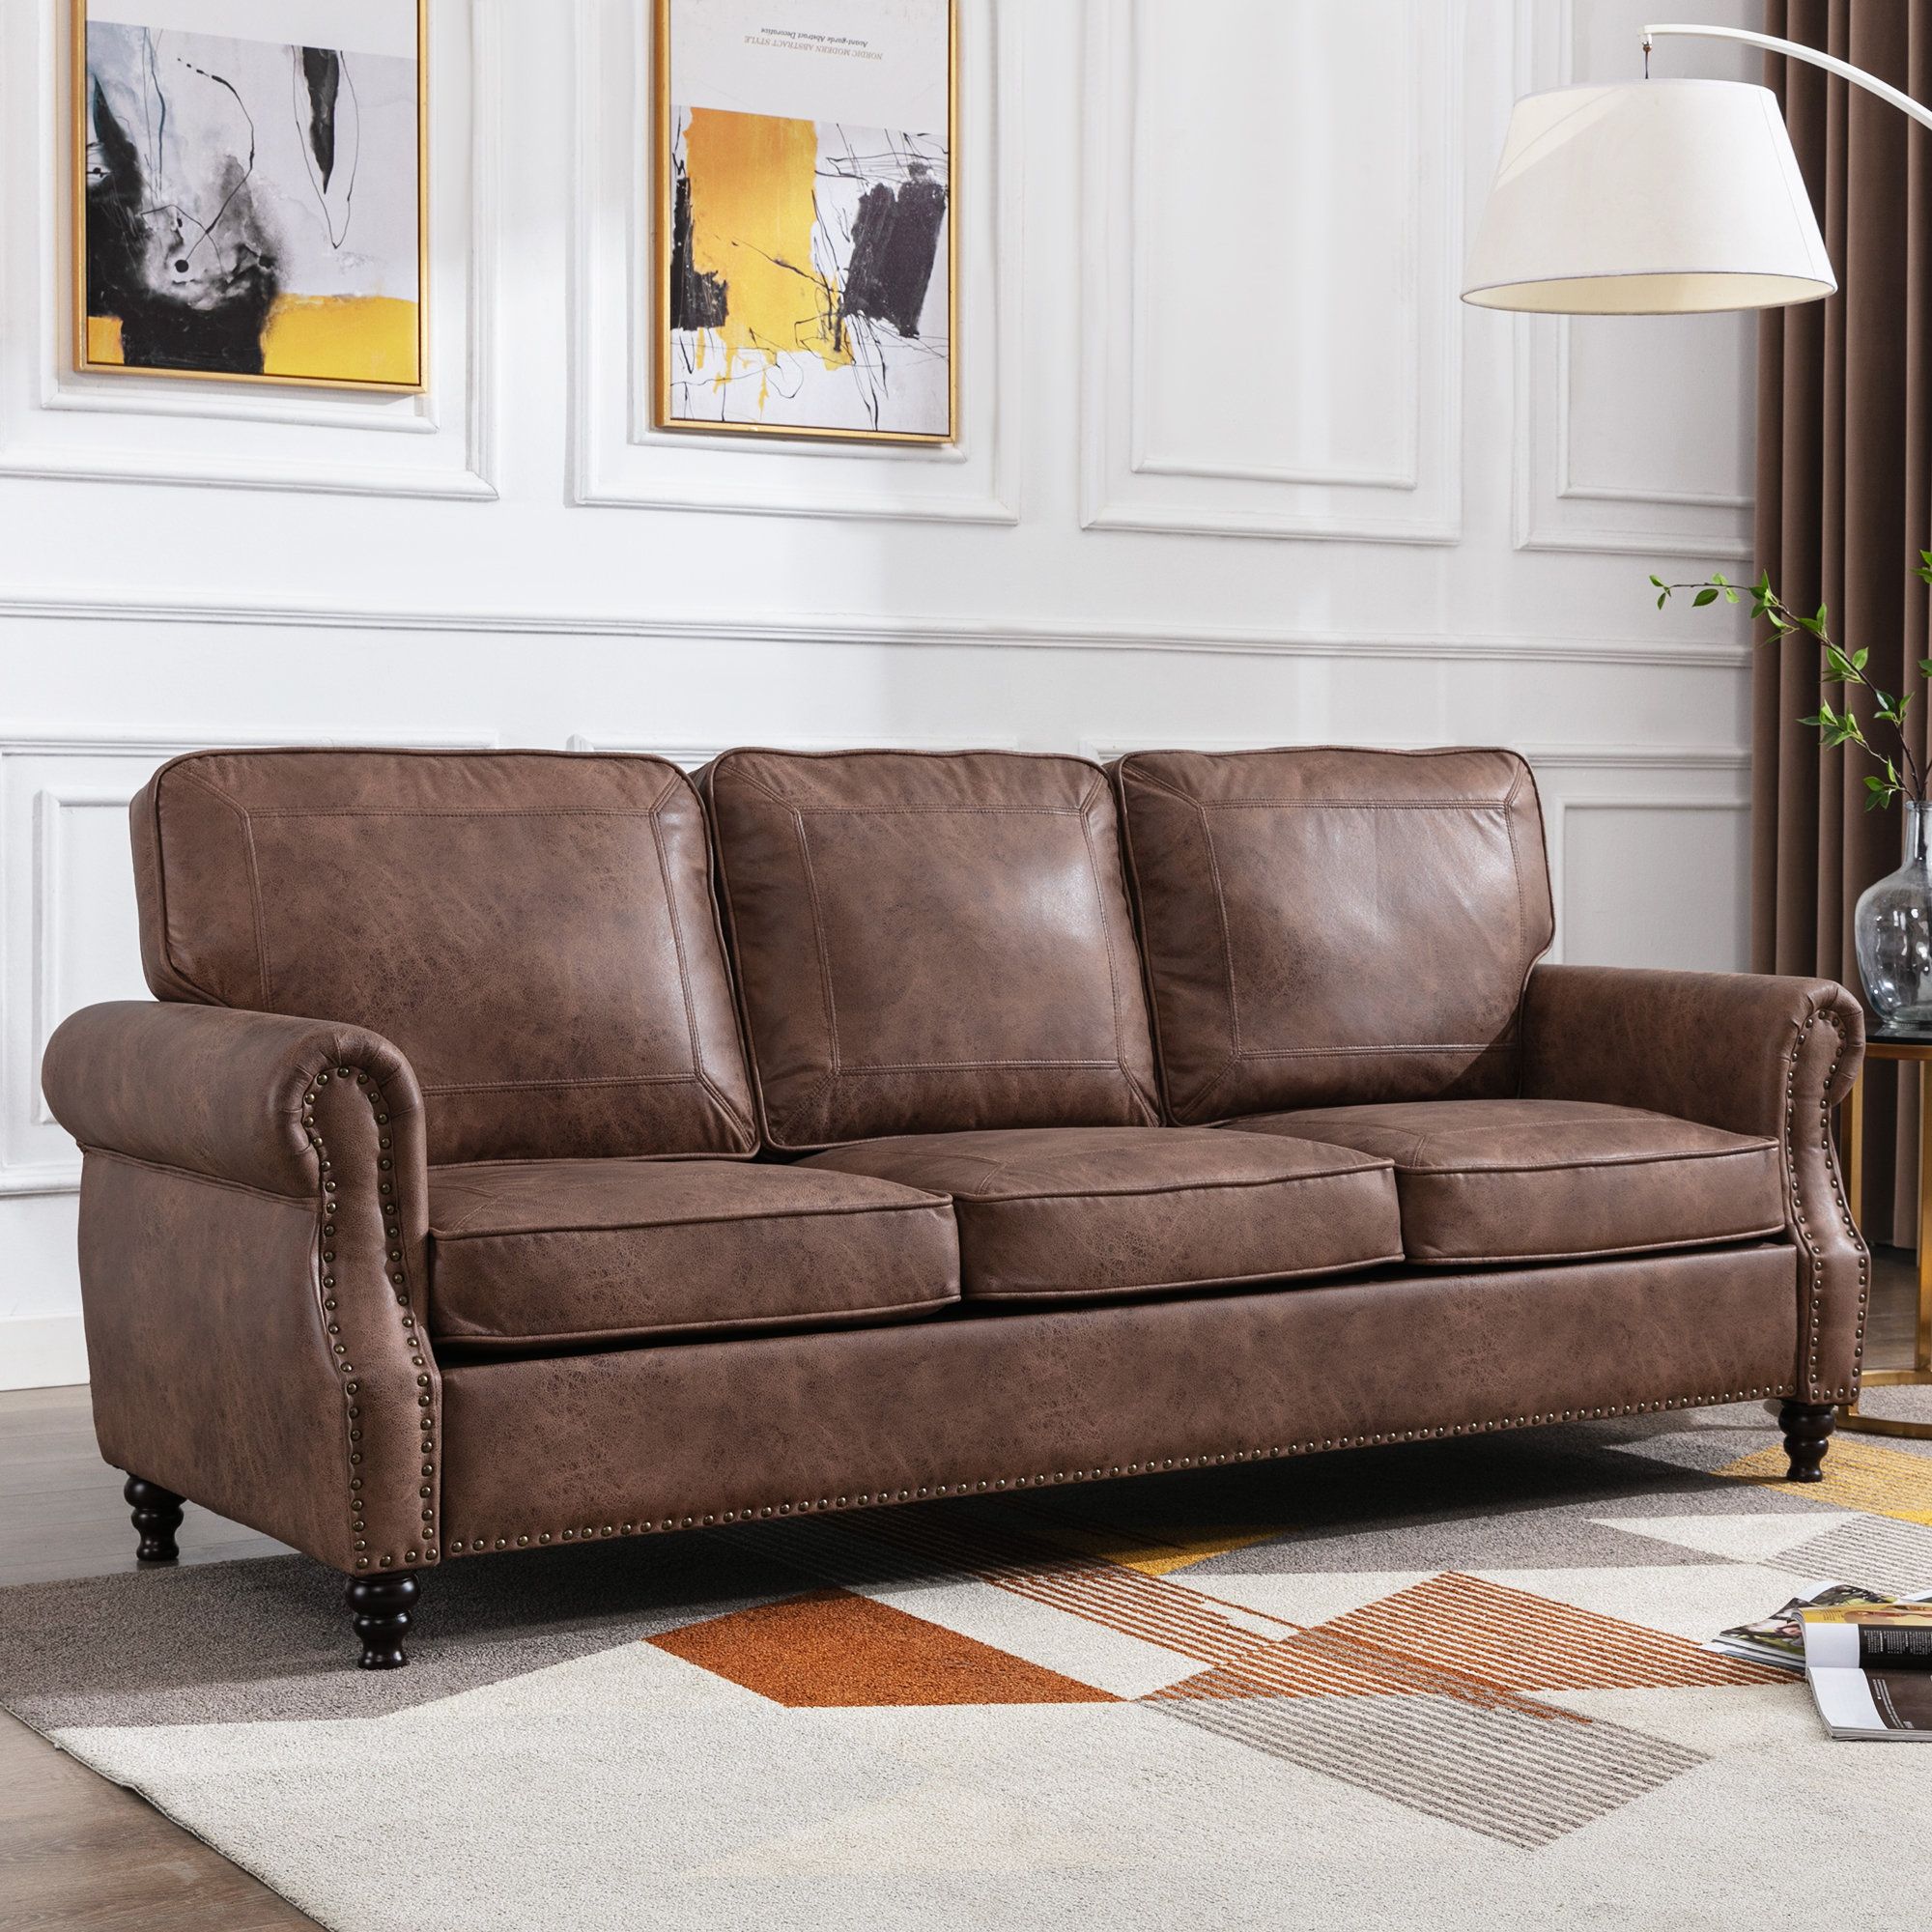 Lark Manor Amarius 80" Wide Faux Leather Rolled Arm Sofa & Reviews | Wayfair Within Faux Leather Sofas In Chocolate Brown (View 11 of 15)